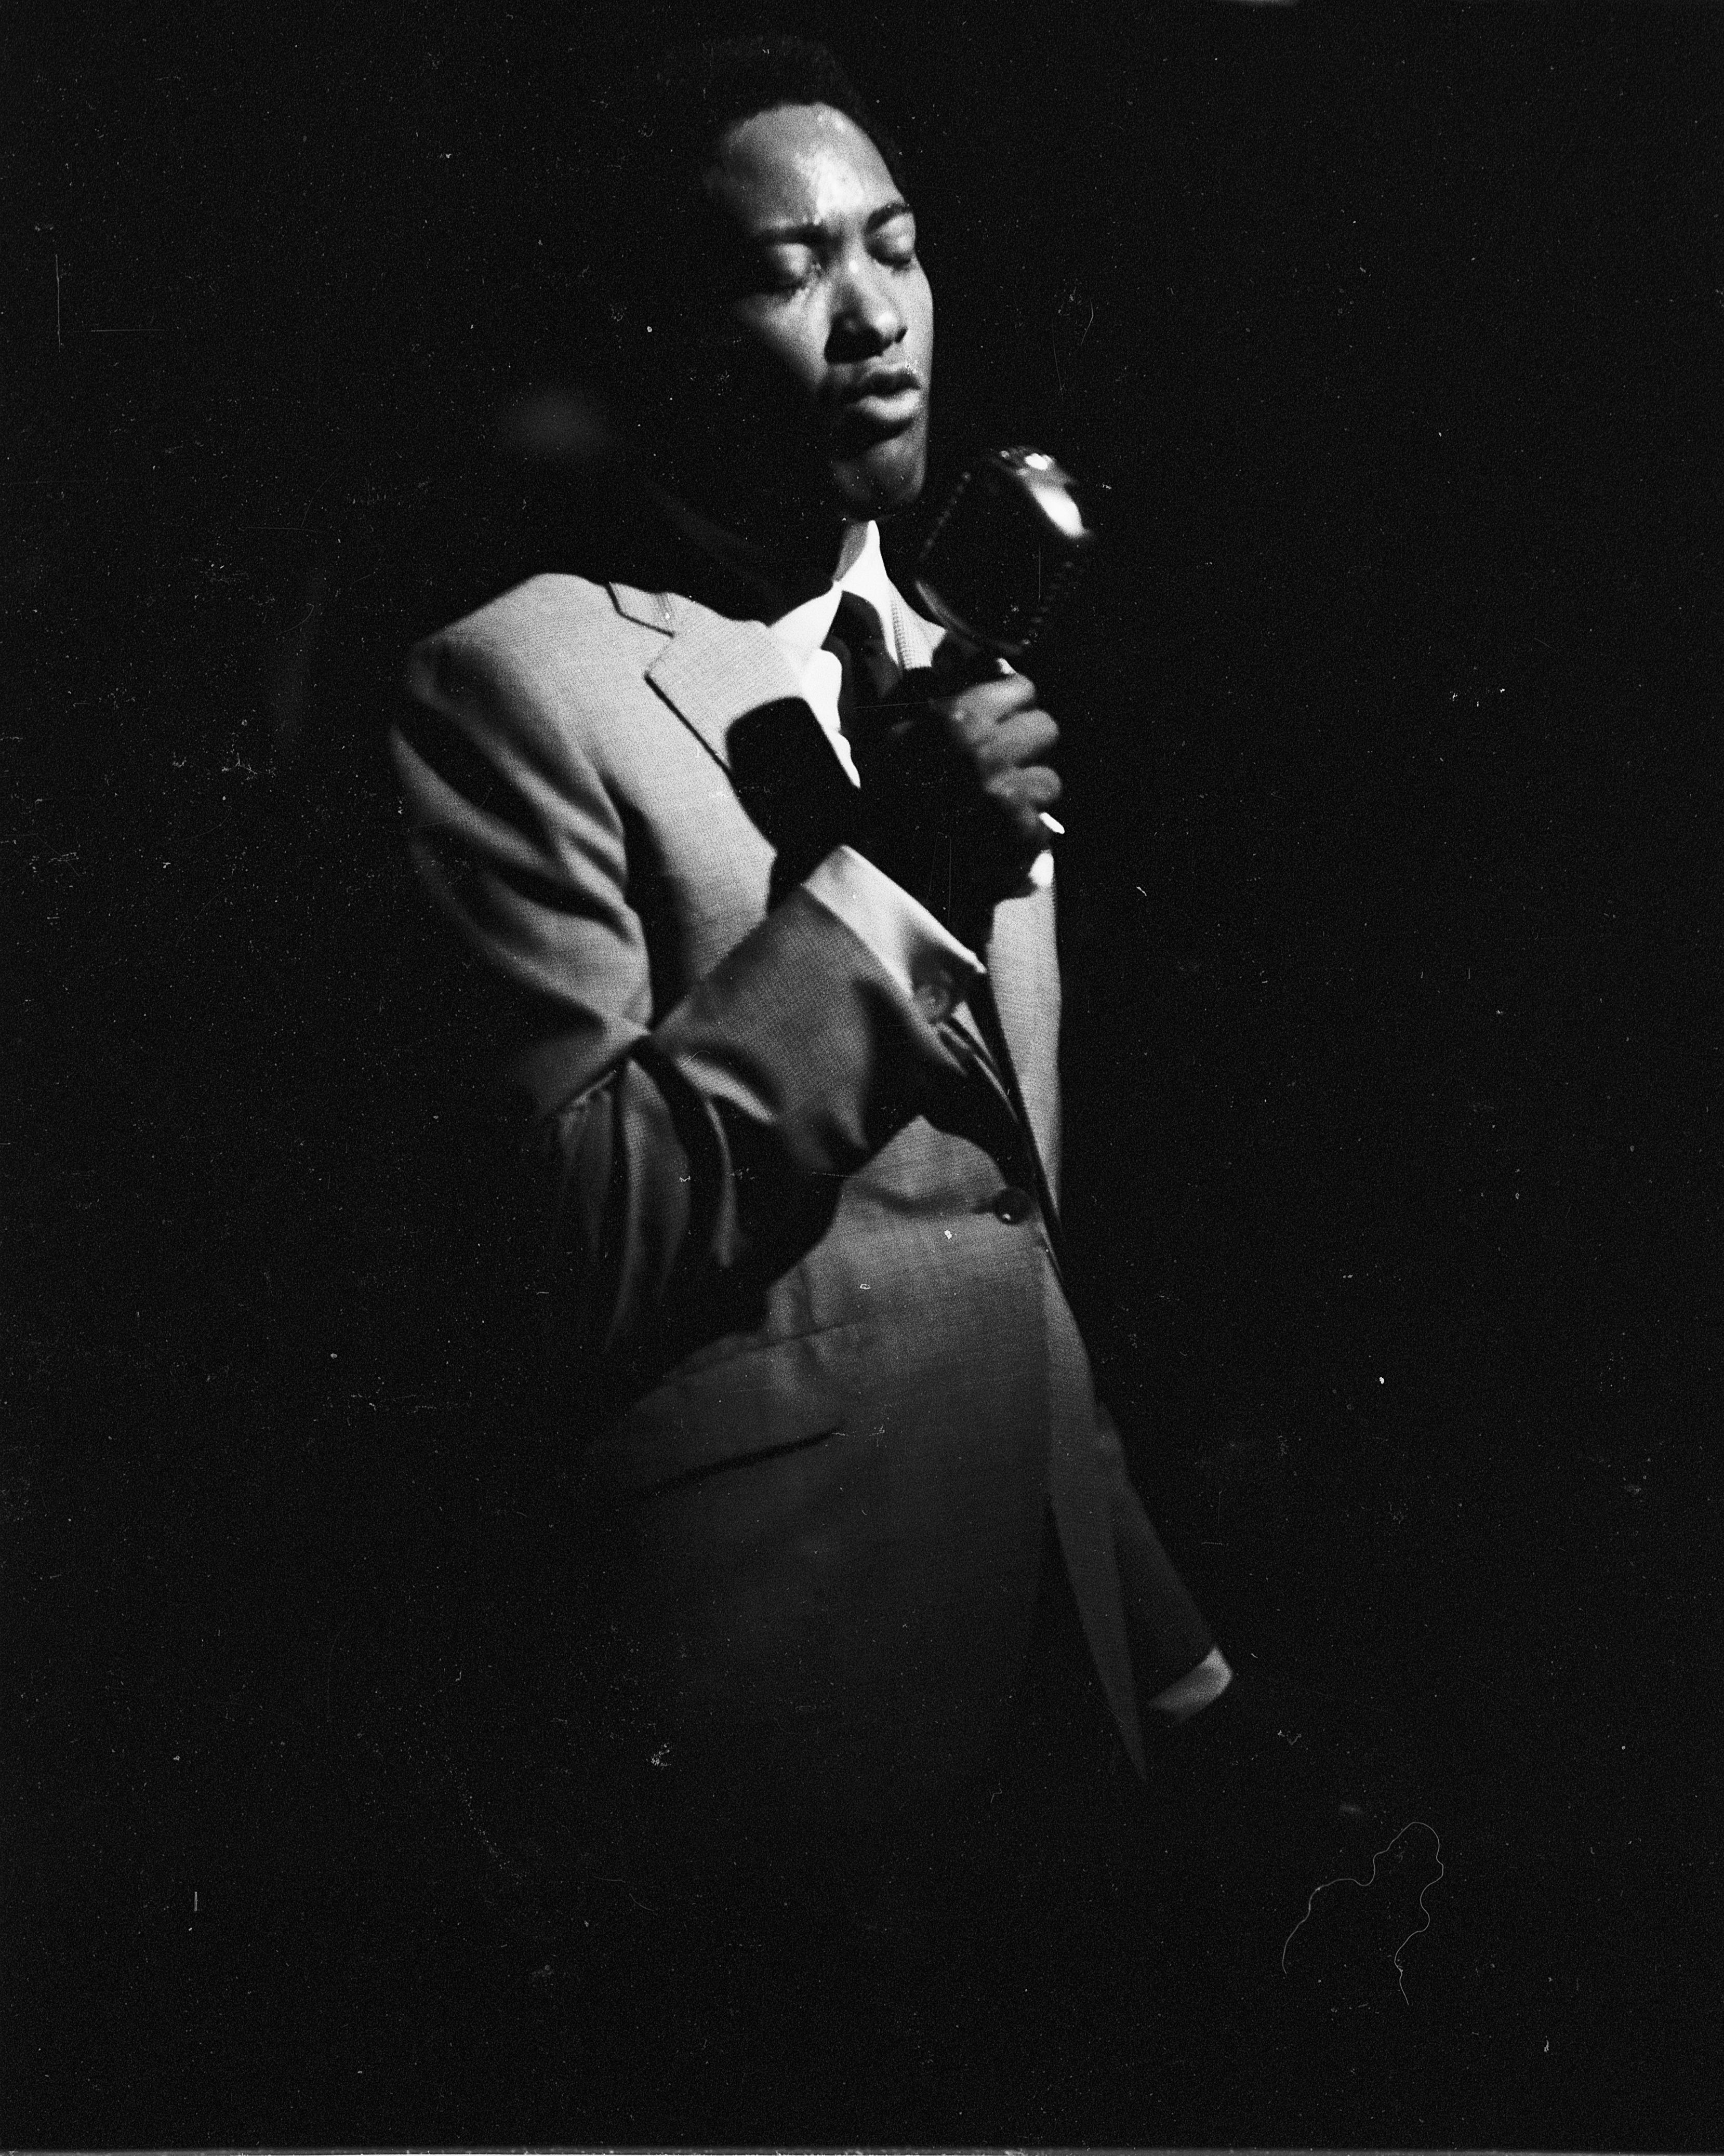 Sam Cooke performs on stage at the Copacabana nightclub, New York, in June 1964. | Photo: Getty Images